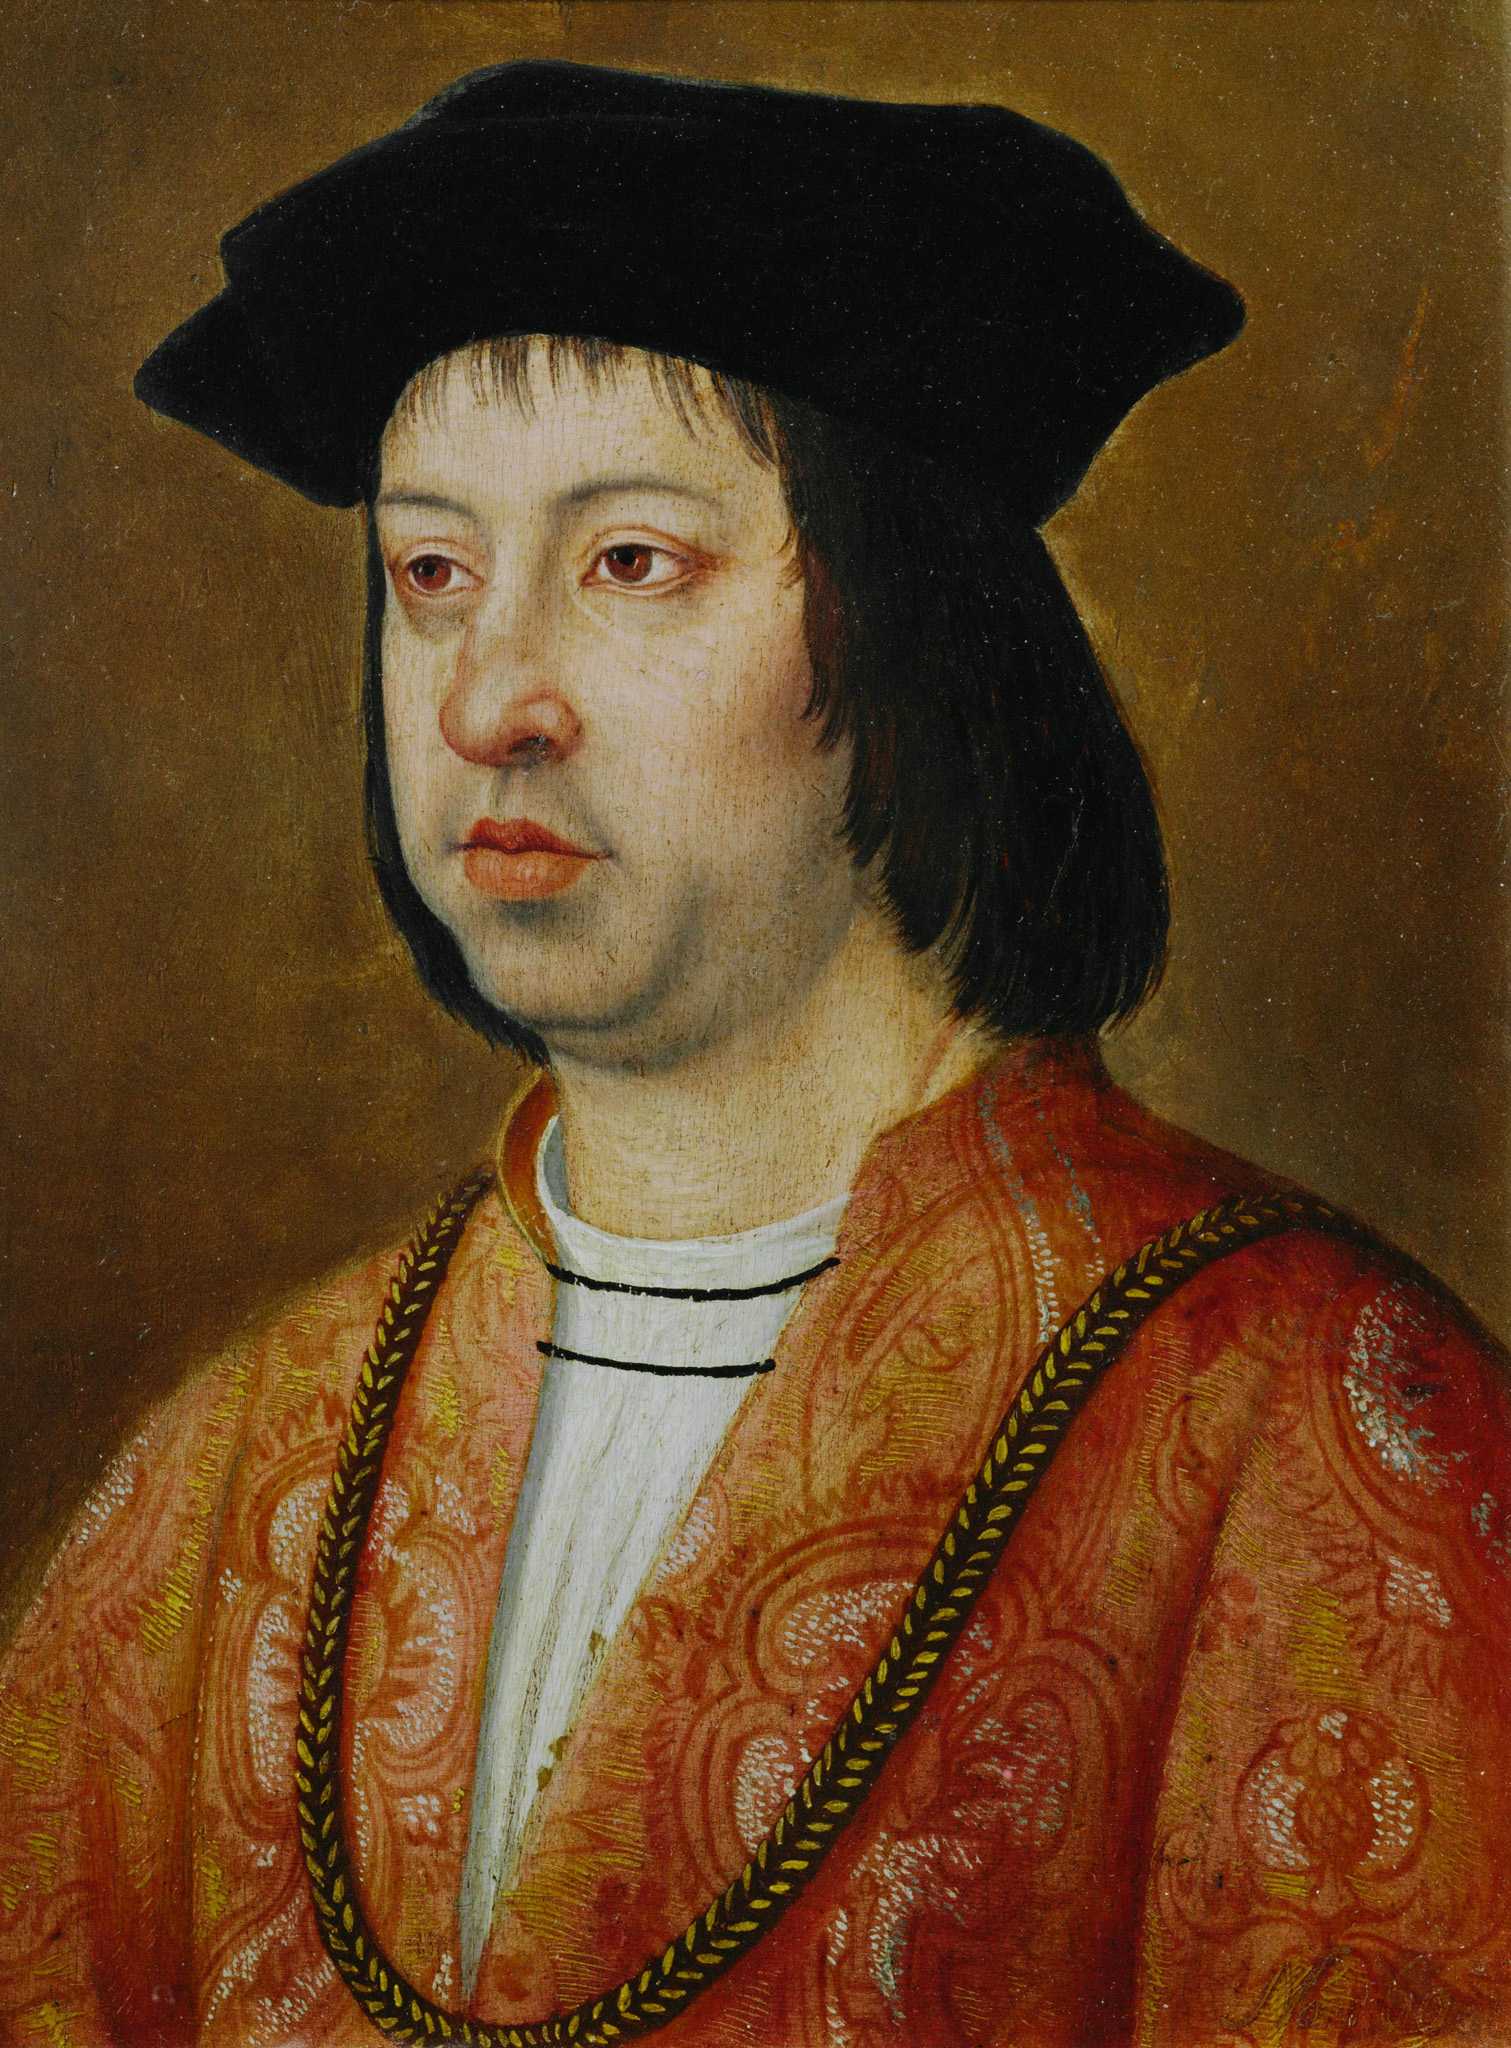 A painted portrait of King Ferdinand of Spain. He is wearing an orange tunic with a white undershirt.